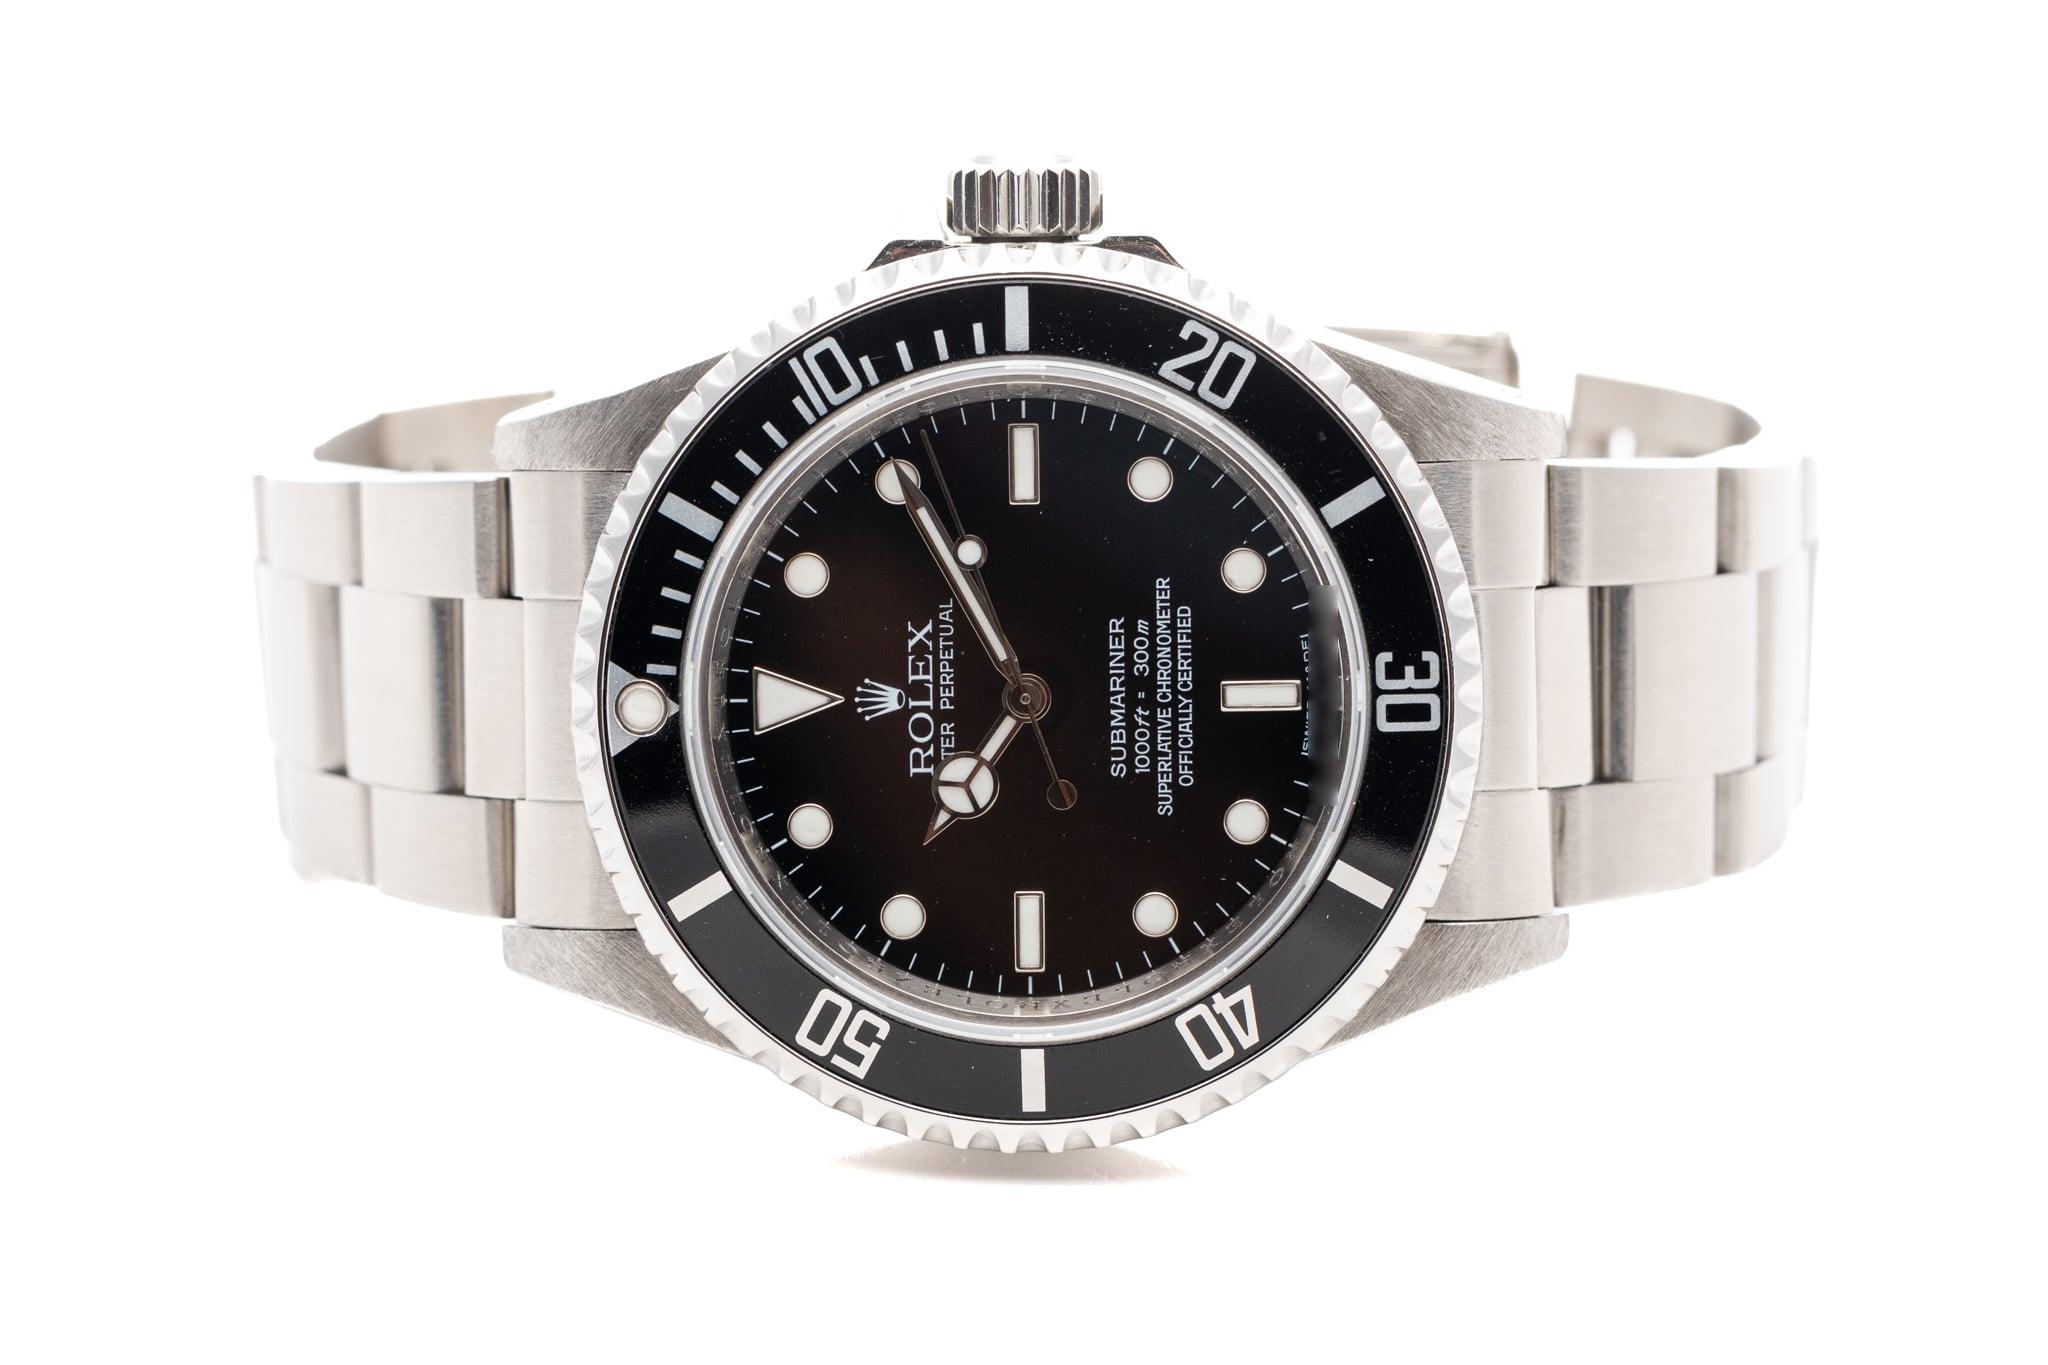 Rolex Submariner No Date 40 Oyster Steel Black Dial Automatic Ref: 14060M 2